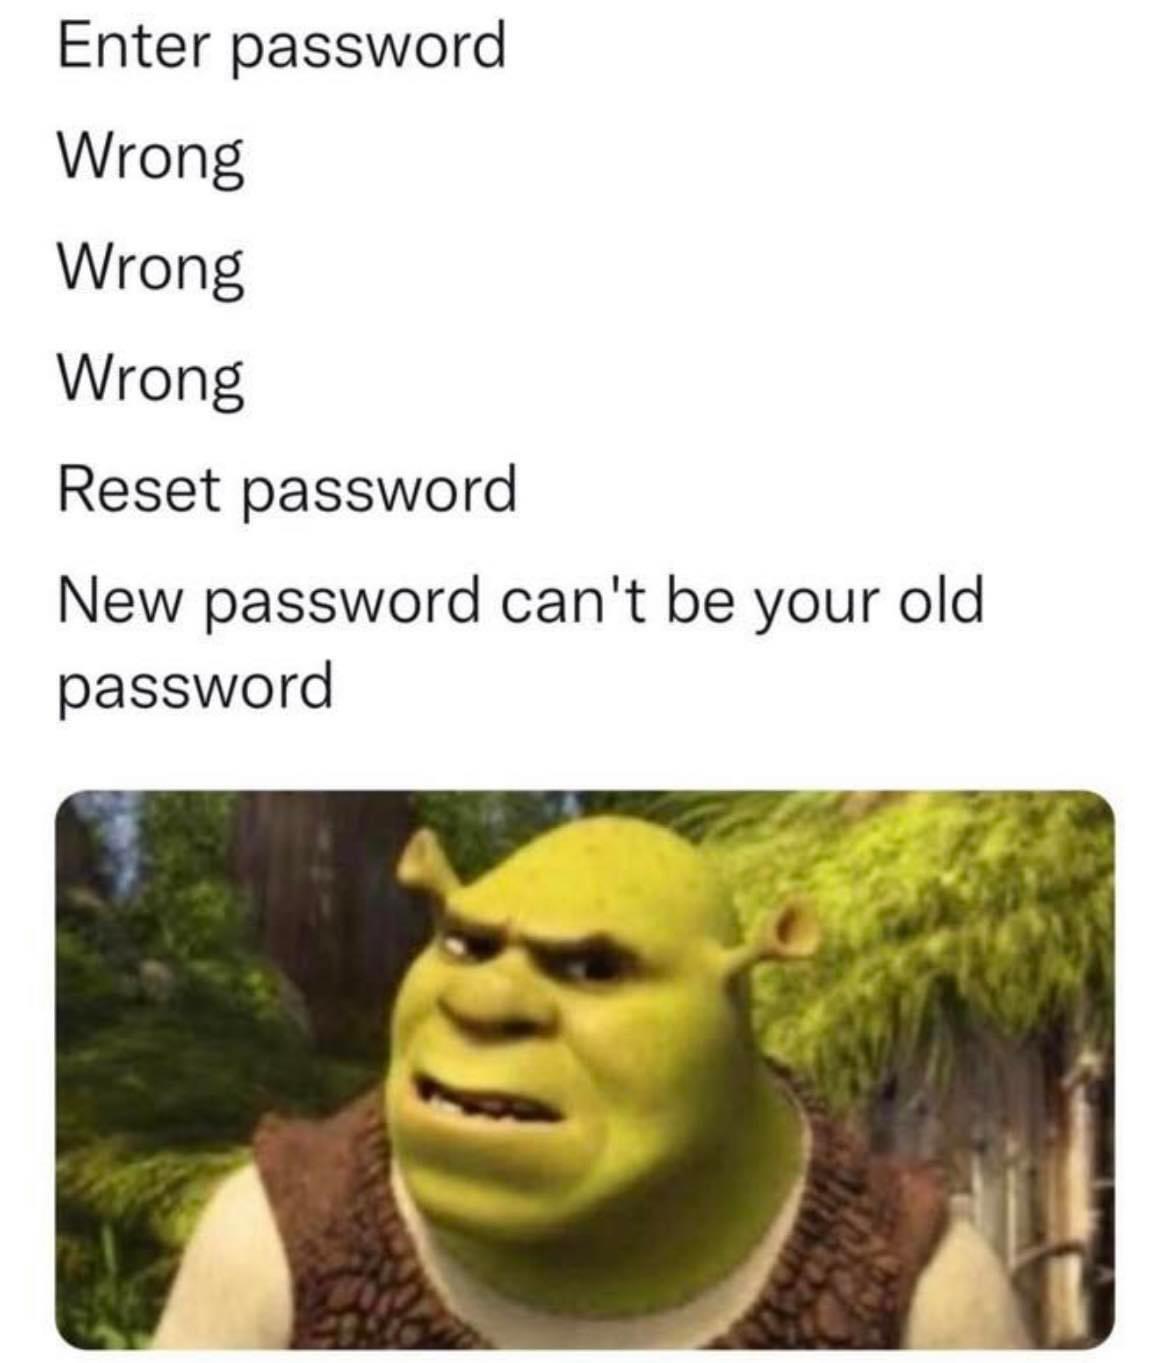 dank memes - head - Enter password Wrong Wrong Wrong Reset password New password can't be your old password